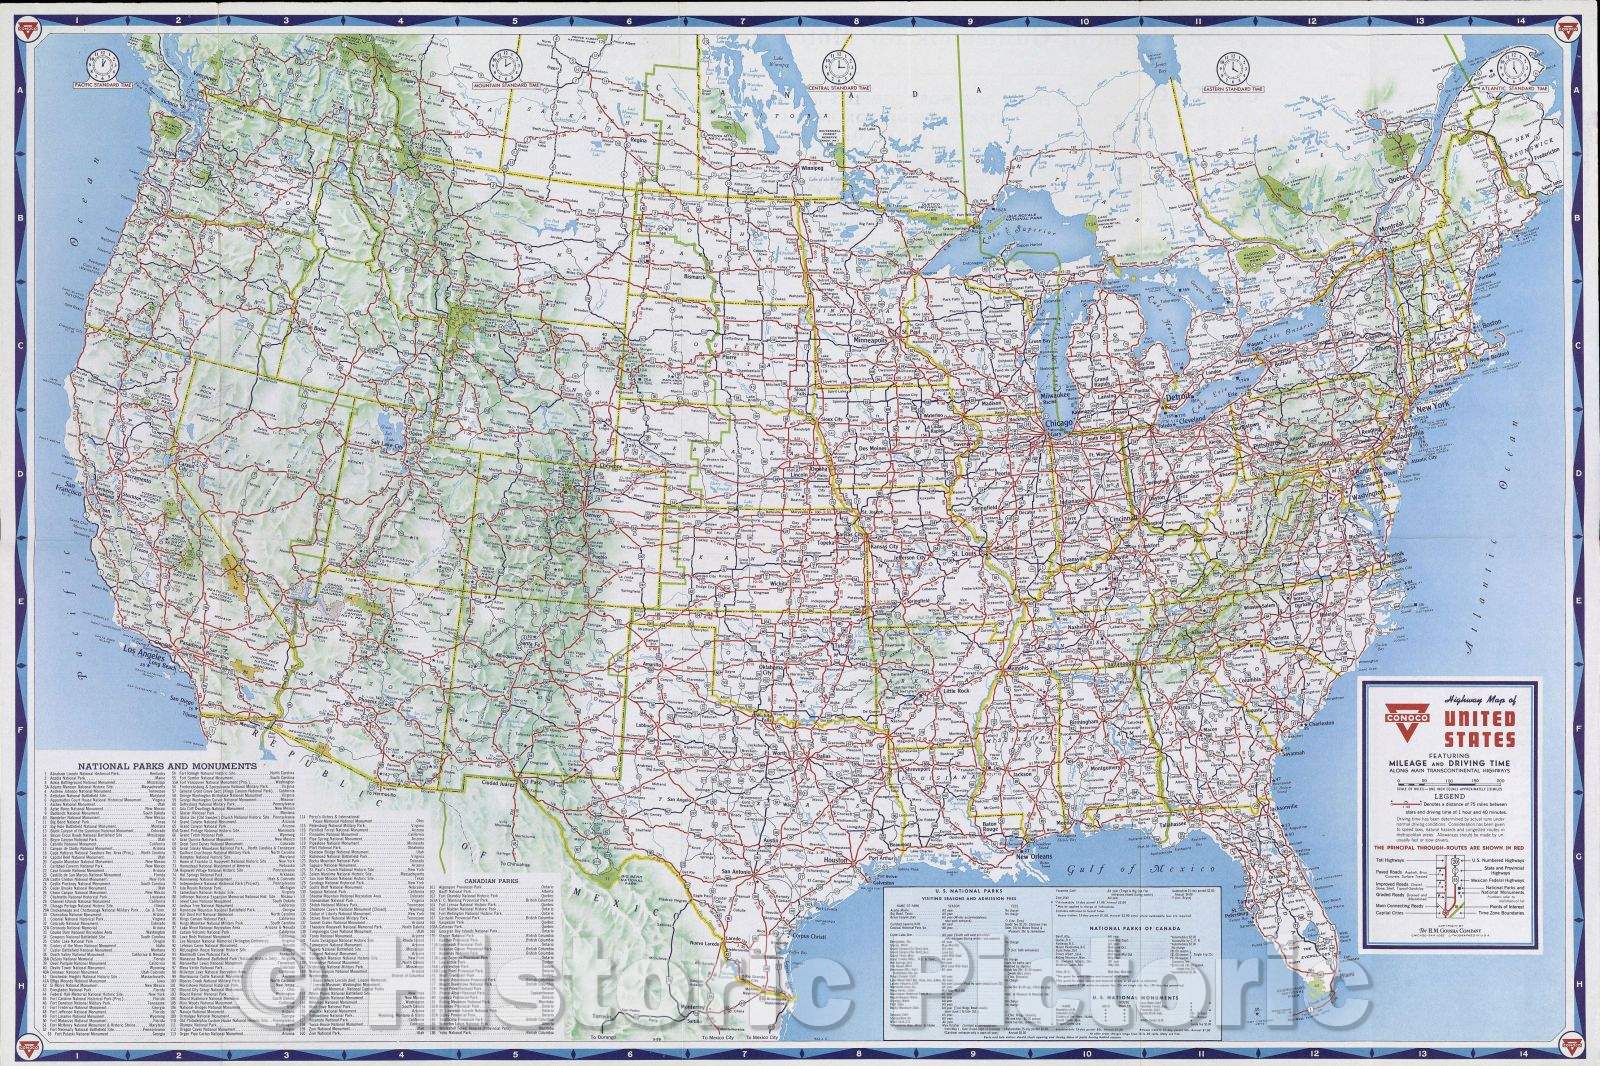 Historic Map : Conoco Highway Map of United States featuring mileage and driving time along main transcontinental highways., c. 1950 , Vintage Wall Art